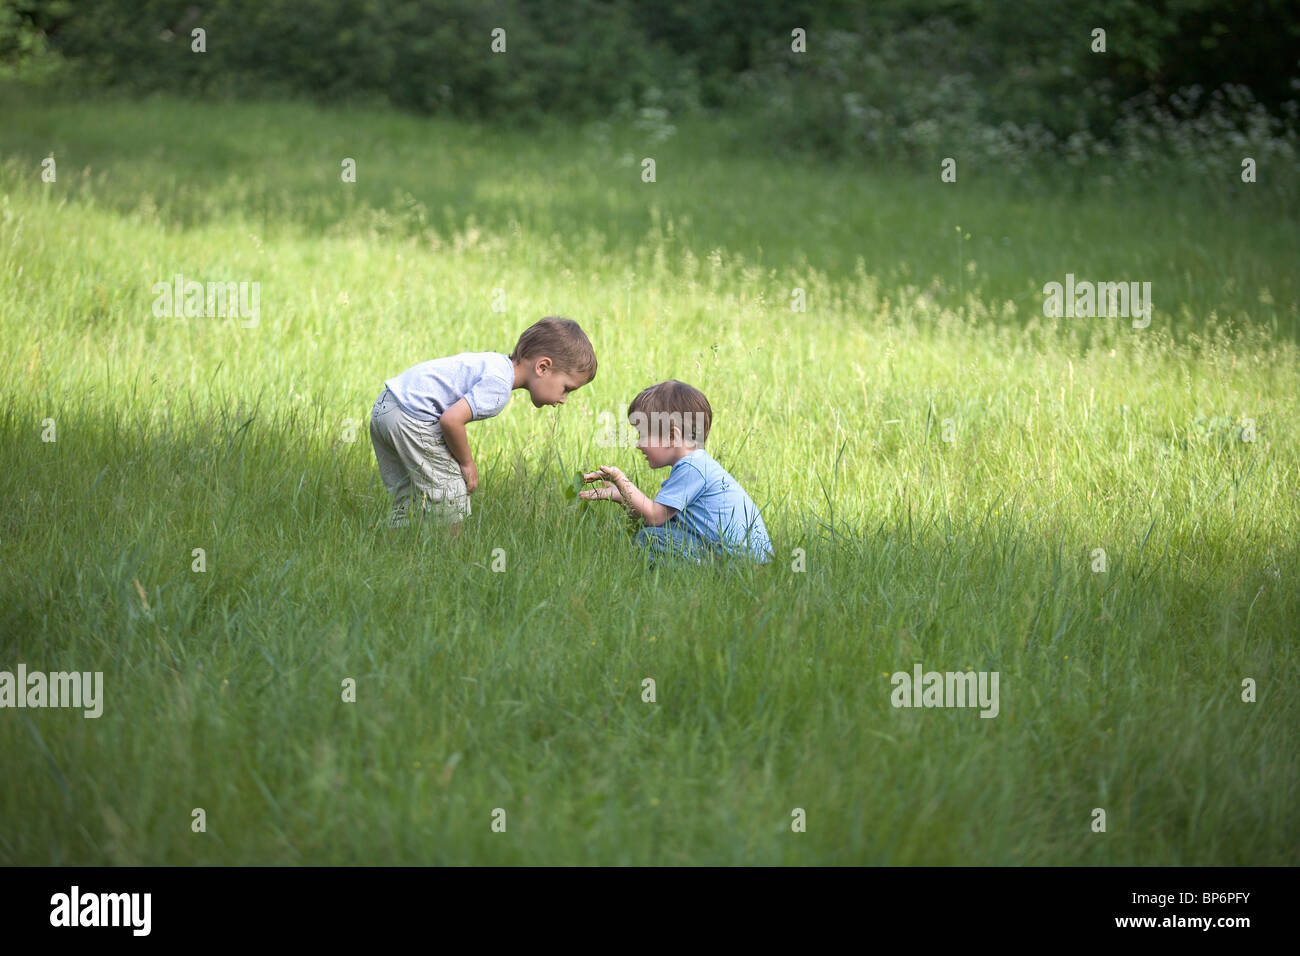 Two young boys in a field Stock Photo